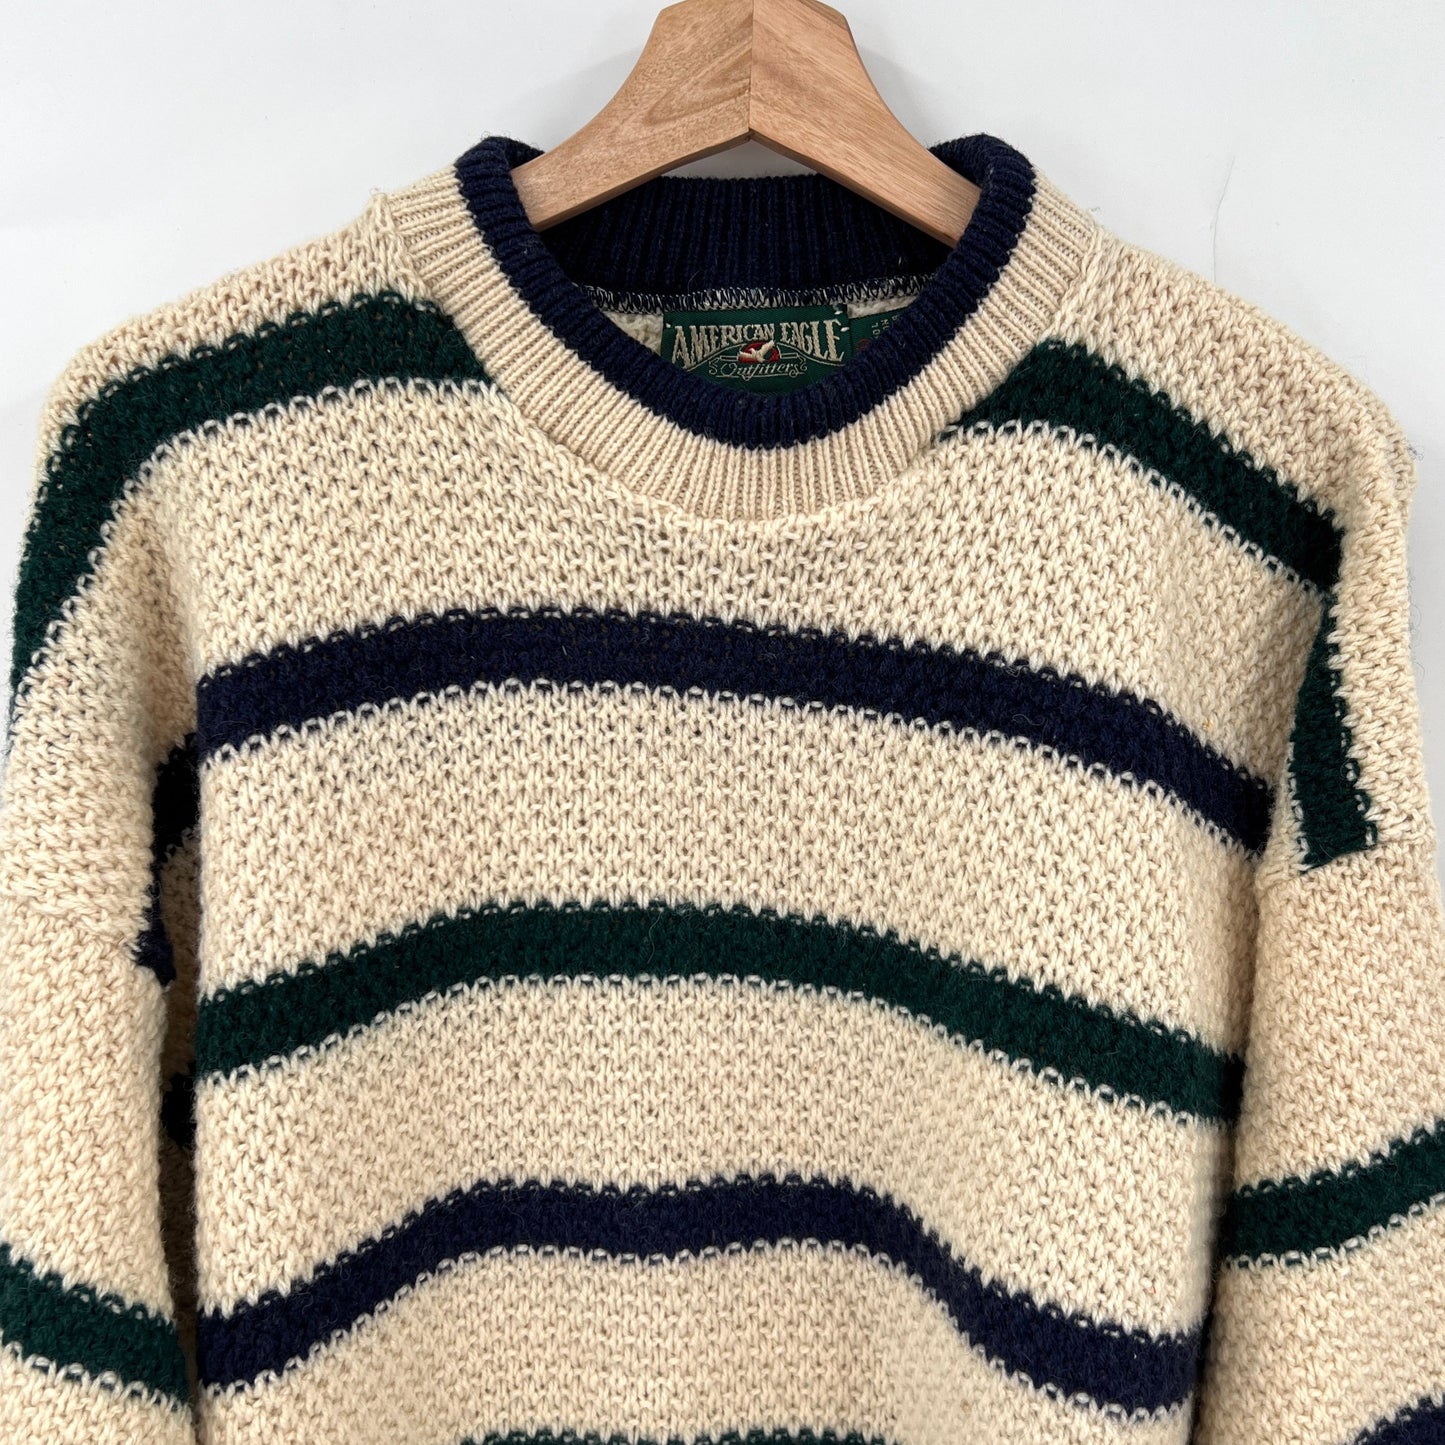 SOLD - Vintage American Eagle Wool Sweater XL